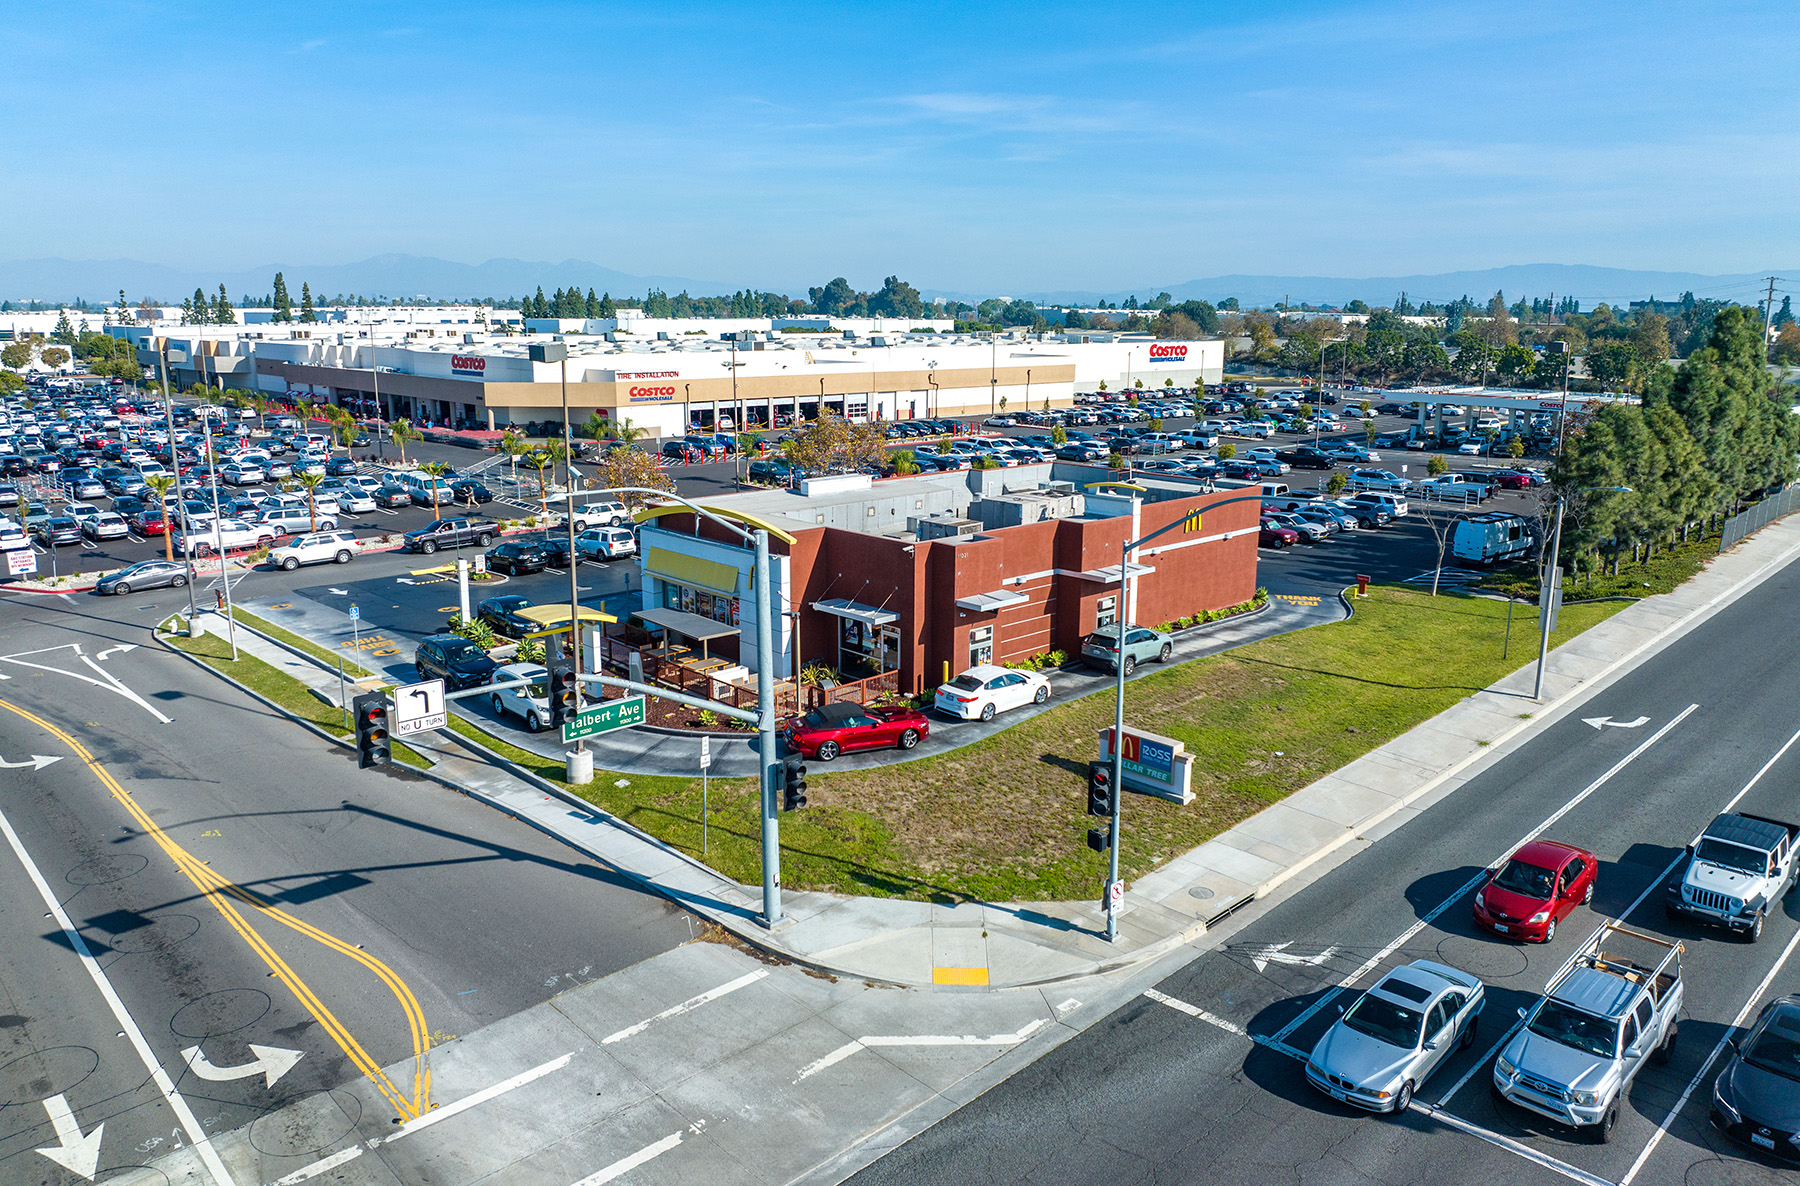 Hanley Investment Group and Oaks Commercial Real Estate Arrange Sale of Single-Tenant McDonald's Drive-Thru on Costco Outparcel in Orange County, Calif., for $3.85 Million